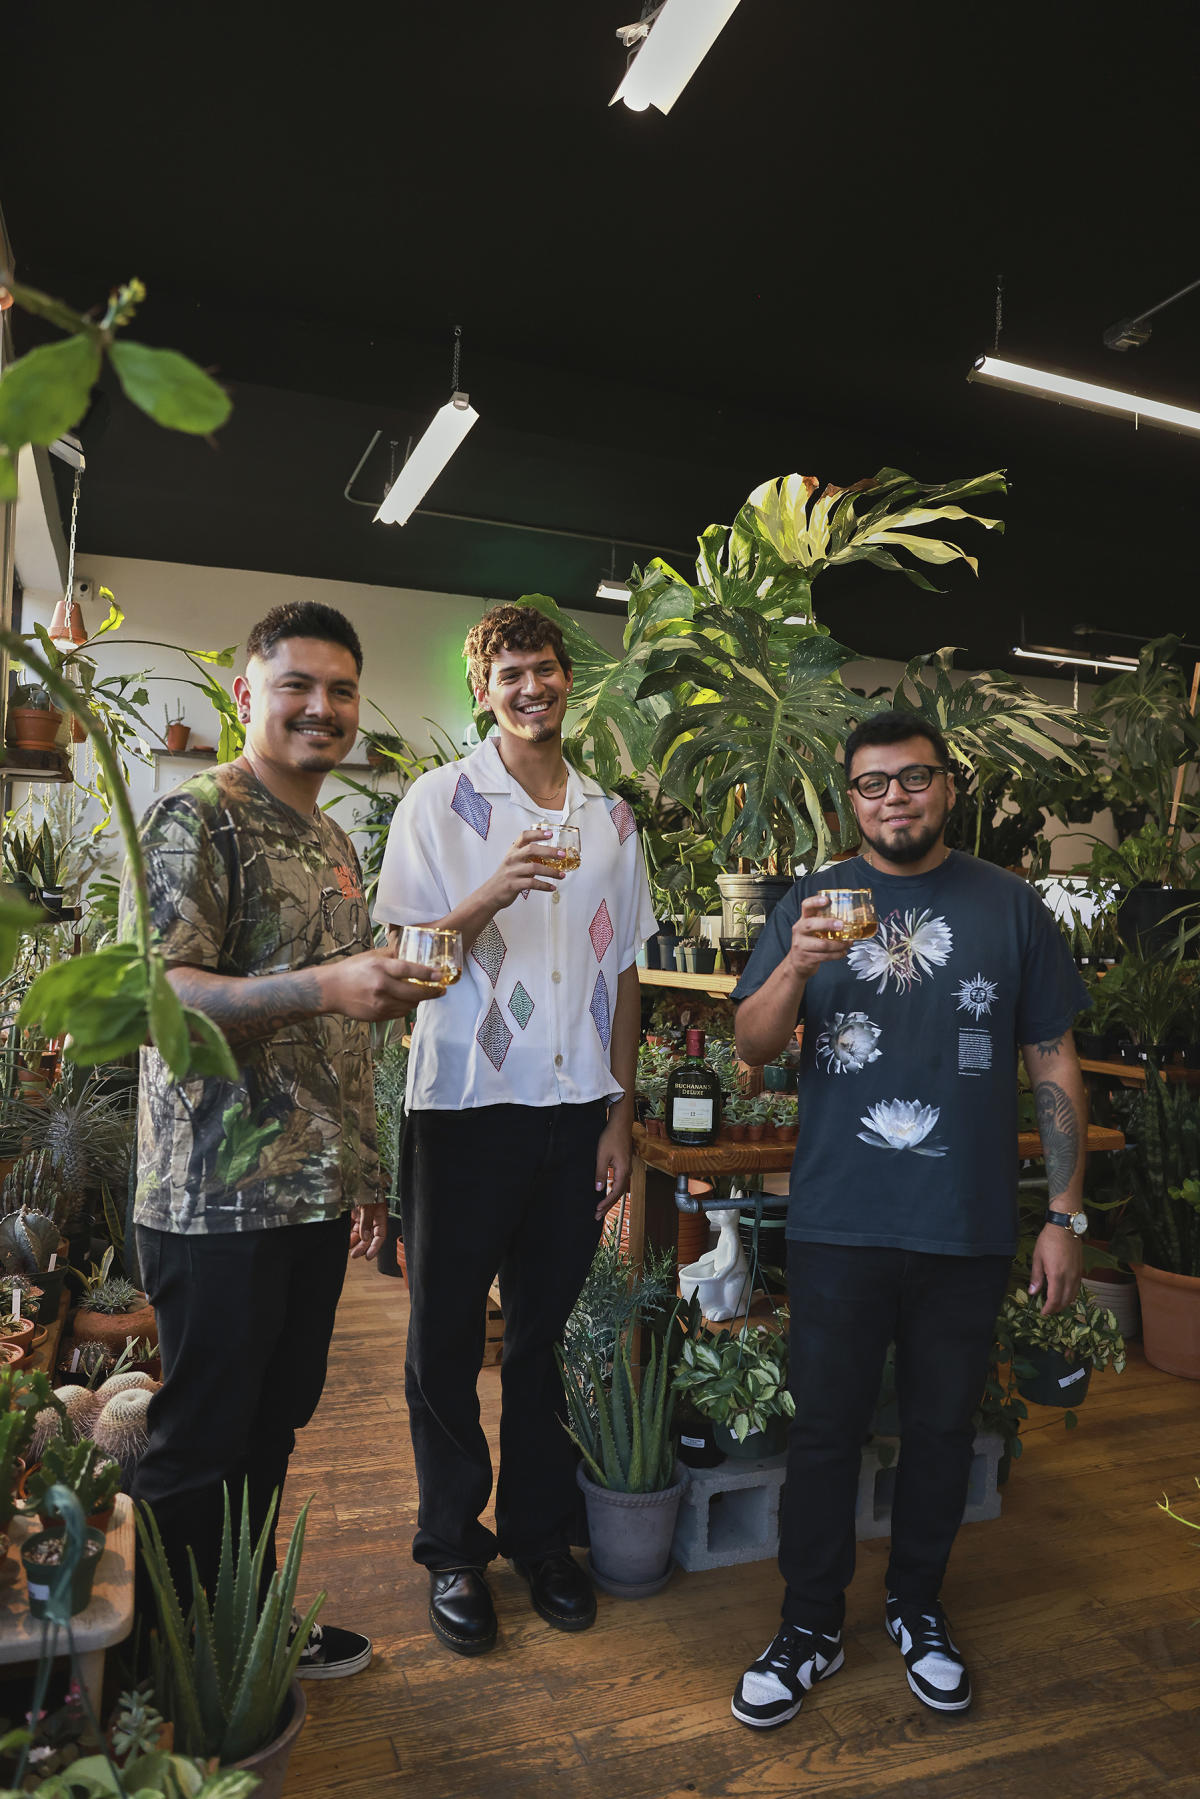 BUCHANAN'S SCOTCH WHISKY AND MEXICAN-AMERICAN SINGER-SONGWRITER OMAR APOLLO, INVITE YOU TO CELEBRATE THE 200% FUTURO AND TOAST TO THE 100% HISPANIC AND 100% AMERICANS SHAPING CULTURE THIS HISPANI